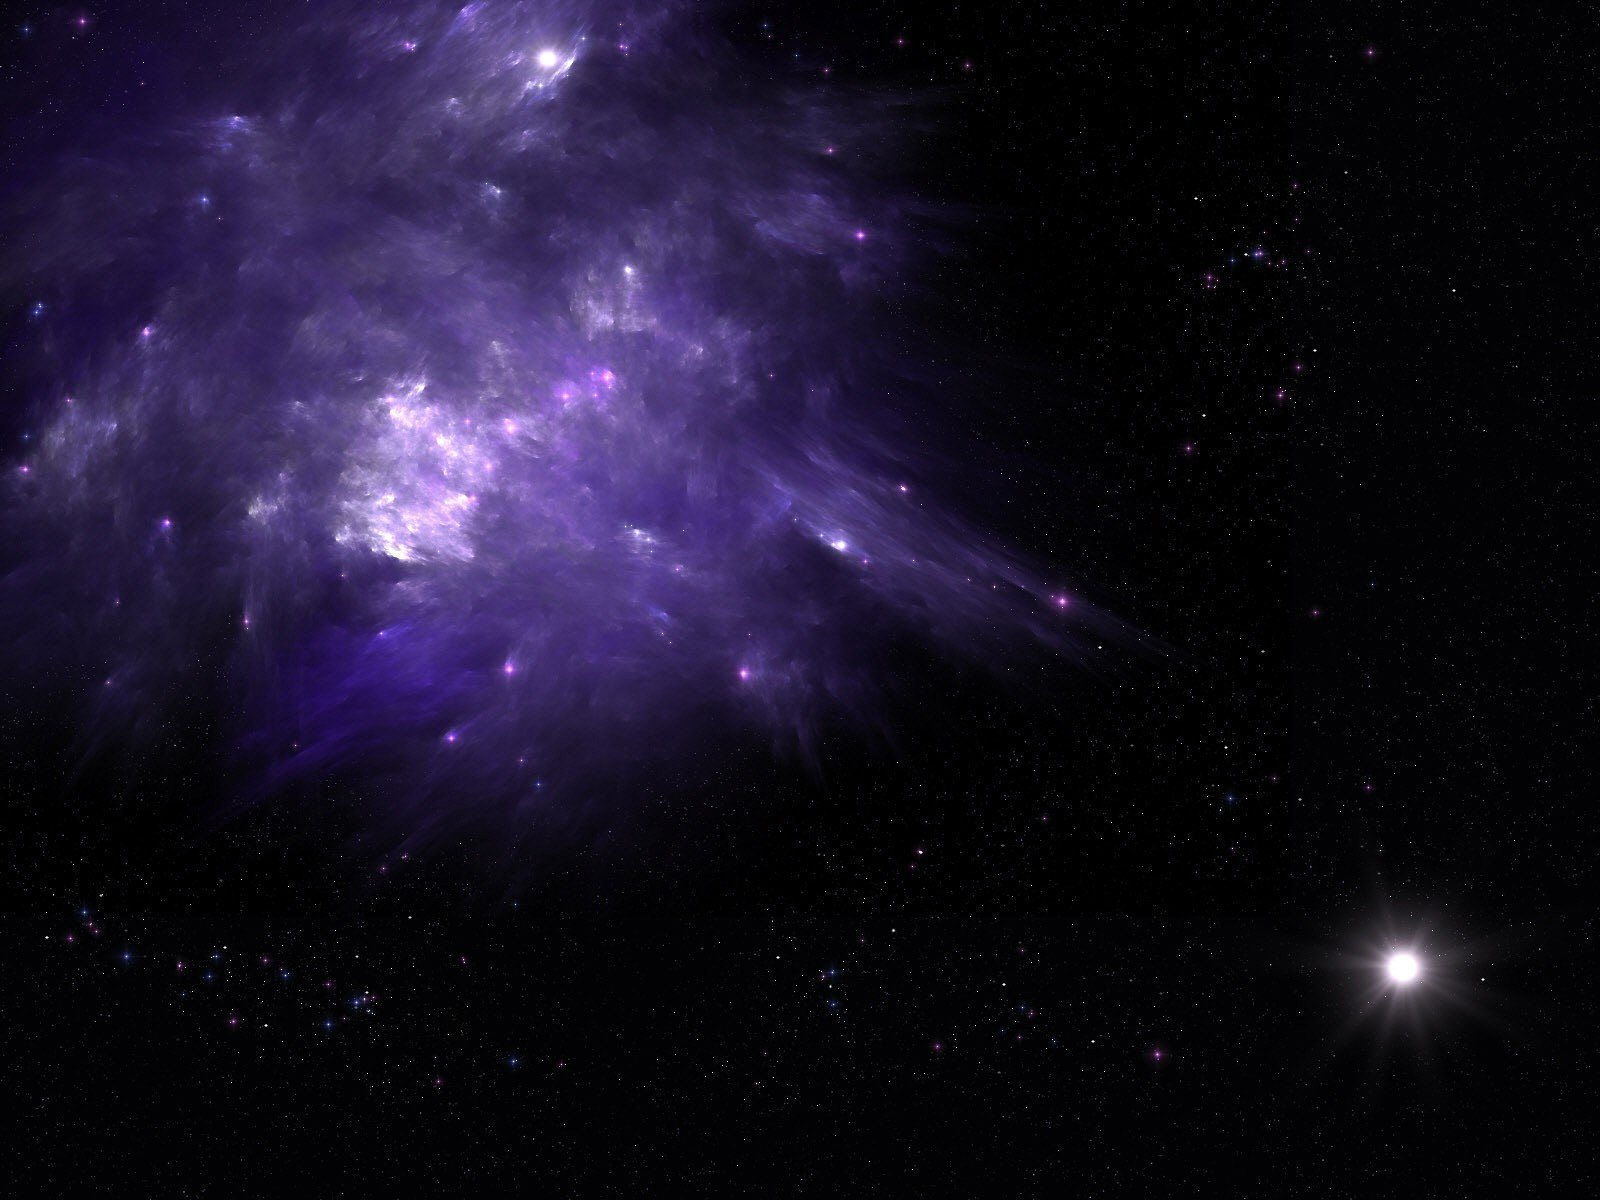 outer, Space, Lights, Stars, Galaxies, Purple, Nebulae, Planet, Earth